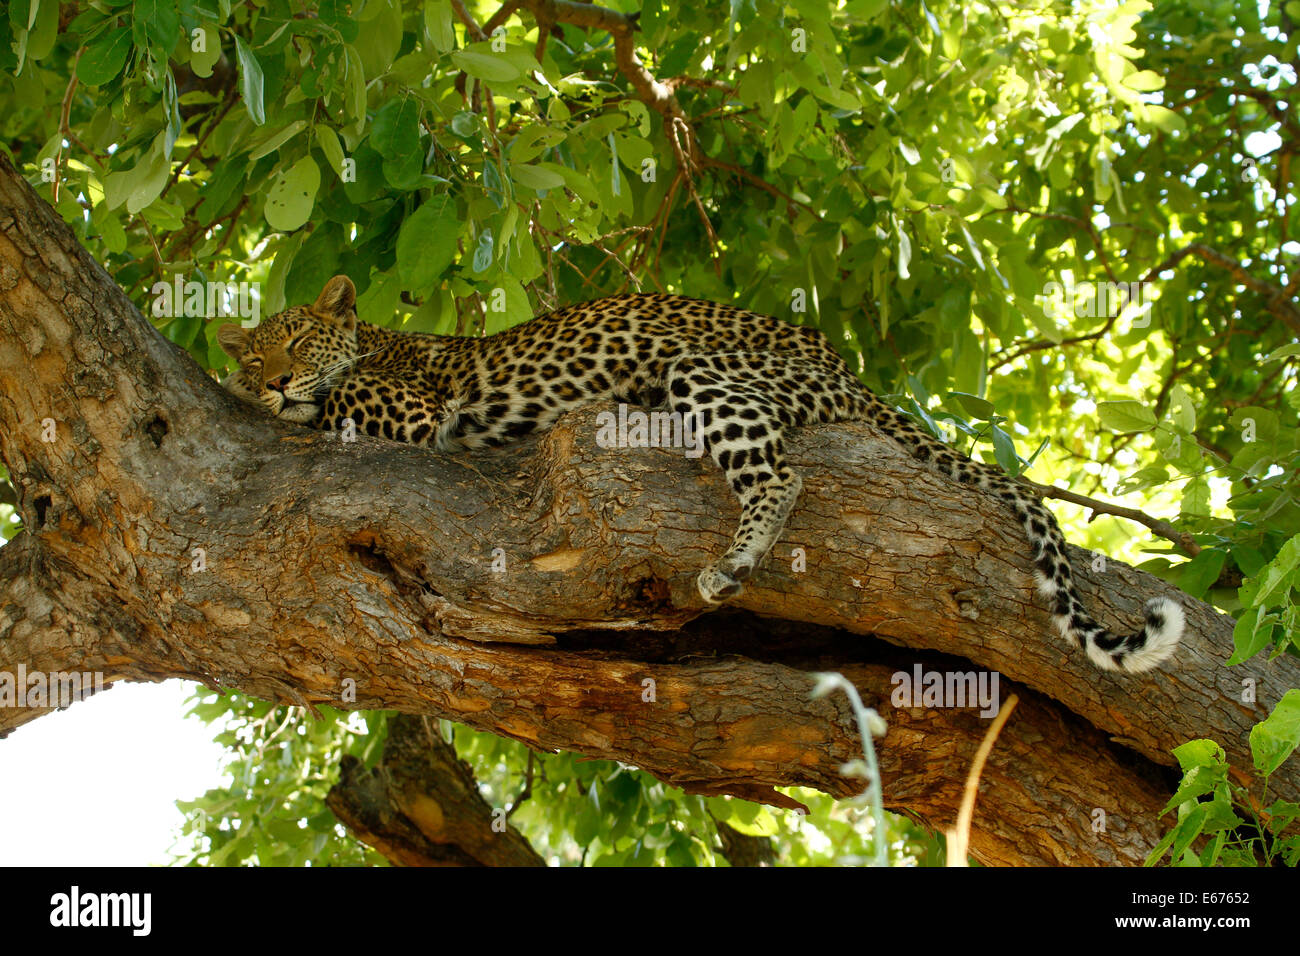 High up in the tree canopy, leopards are at home safe from lions & hyenas, curled up resting with legs dangling Stock Photo